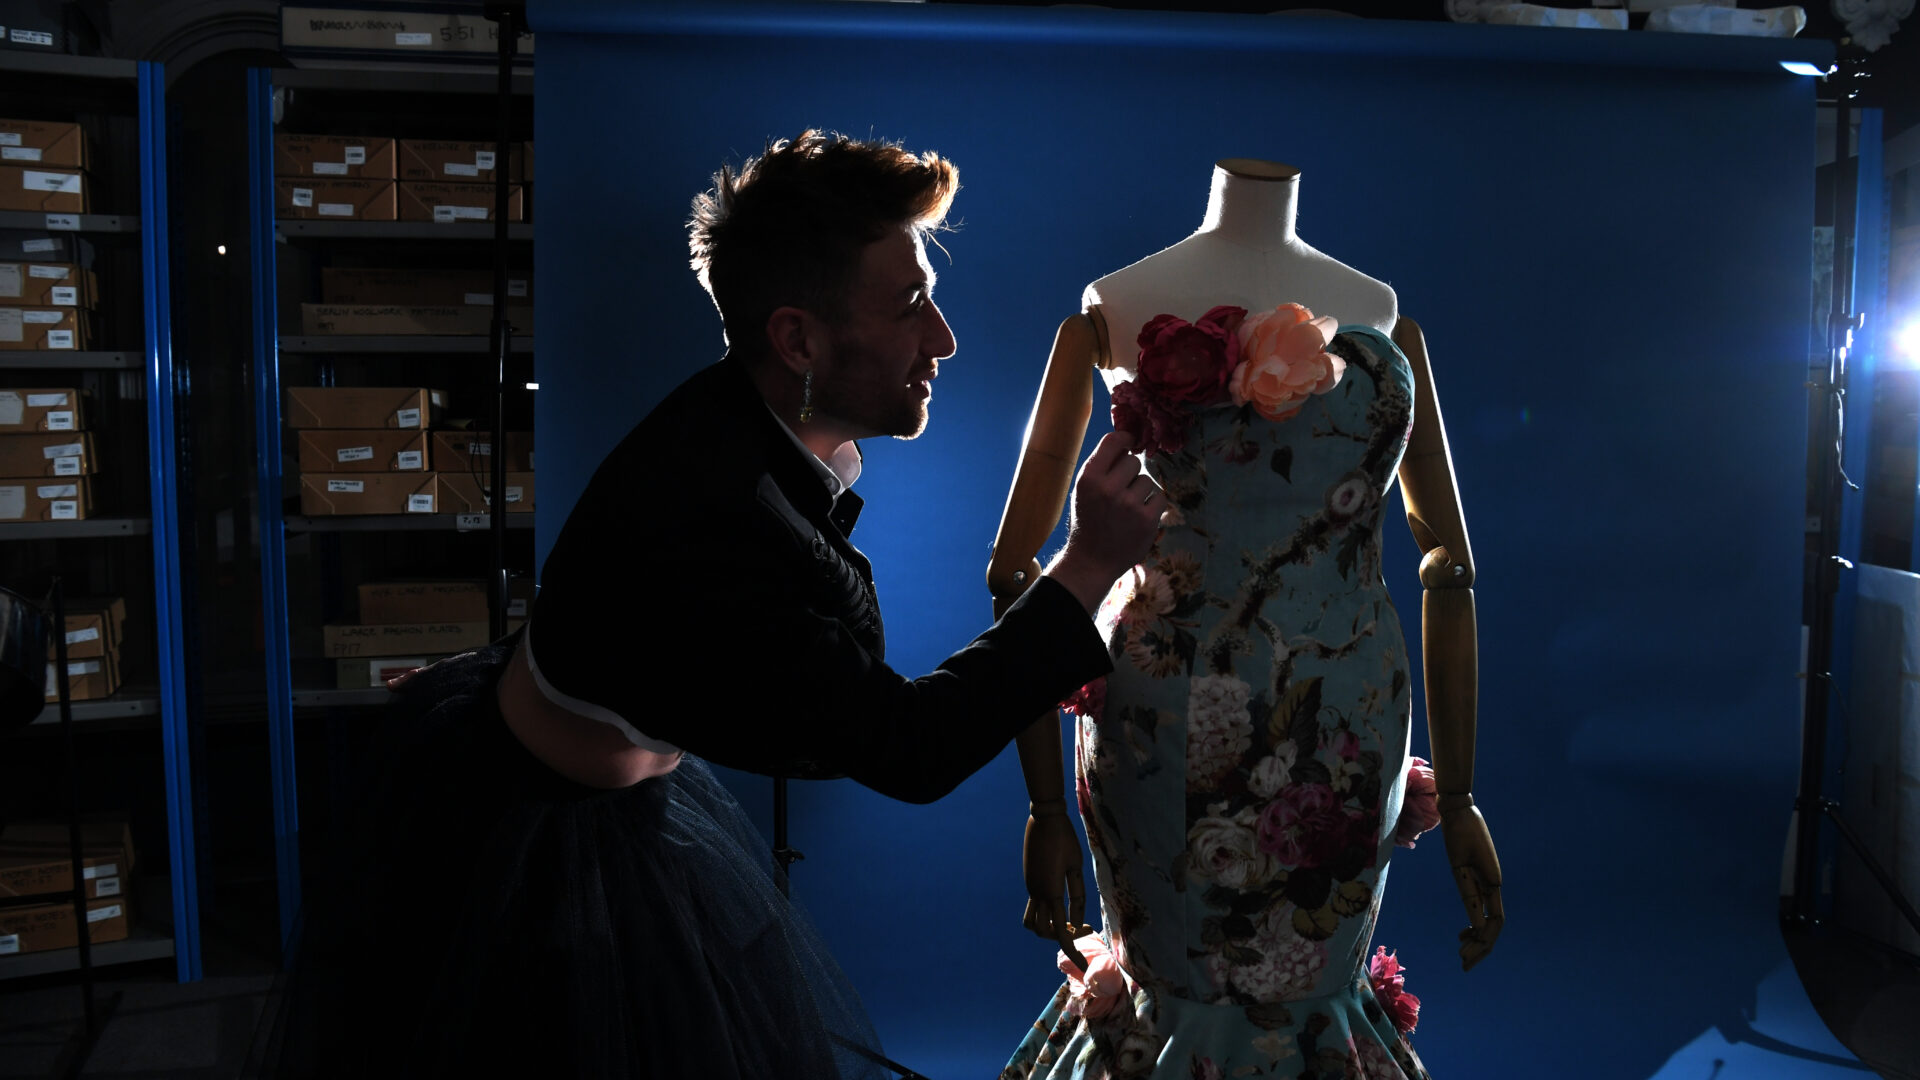 A person in a black jacket adjusts the roses decorating a blue dress.